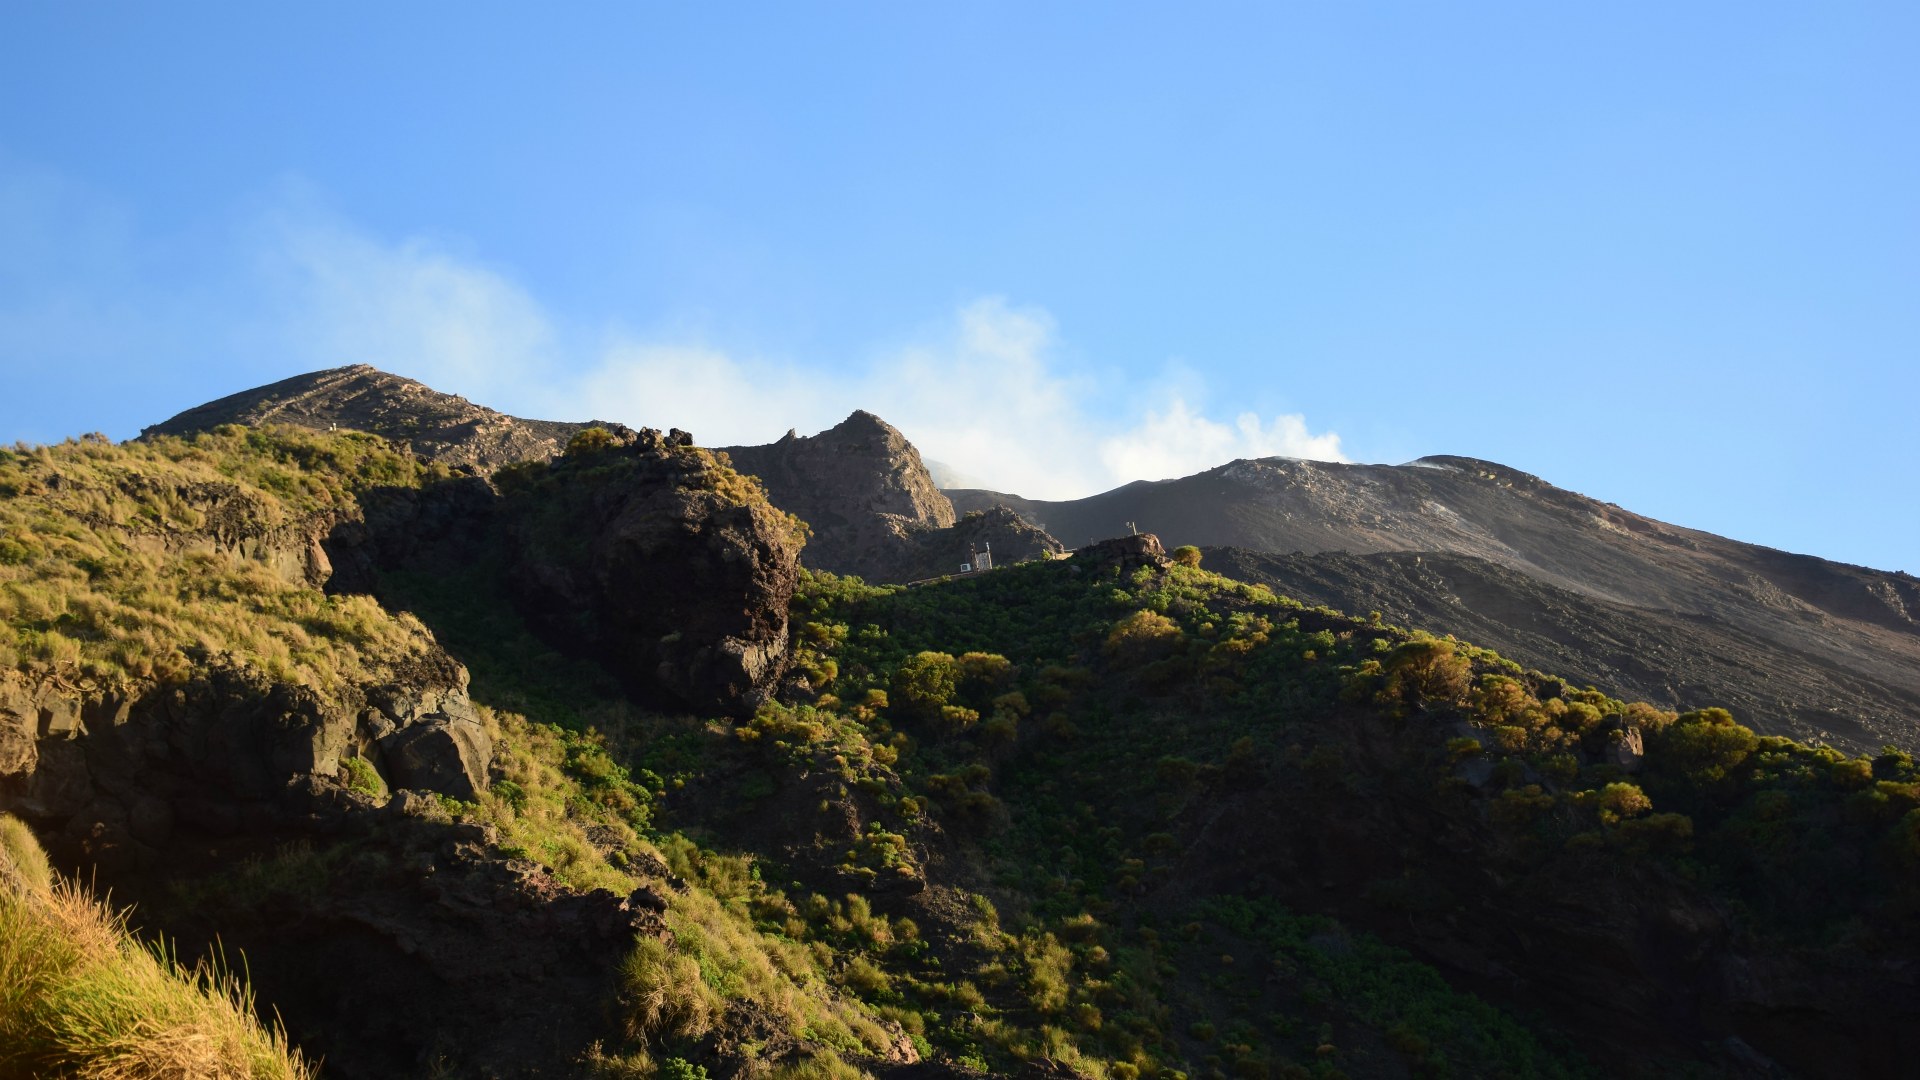 View up to main crater, Stromboli, Aeolian Islands